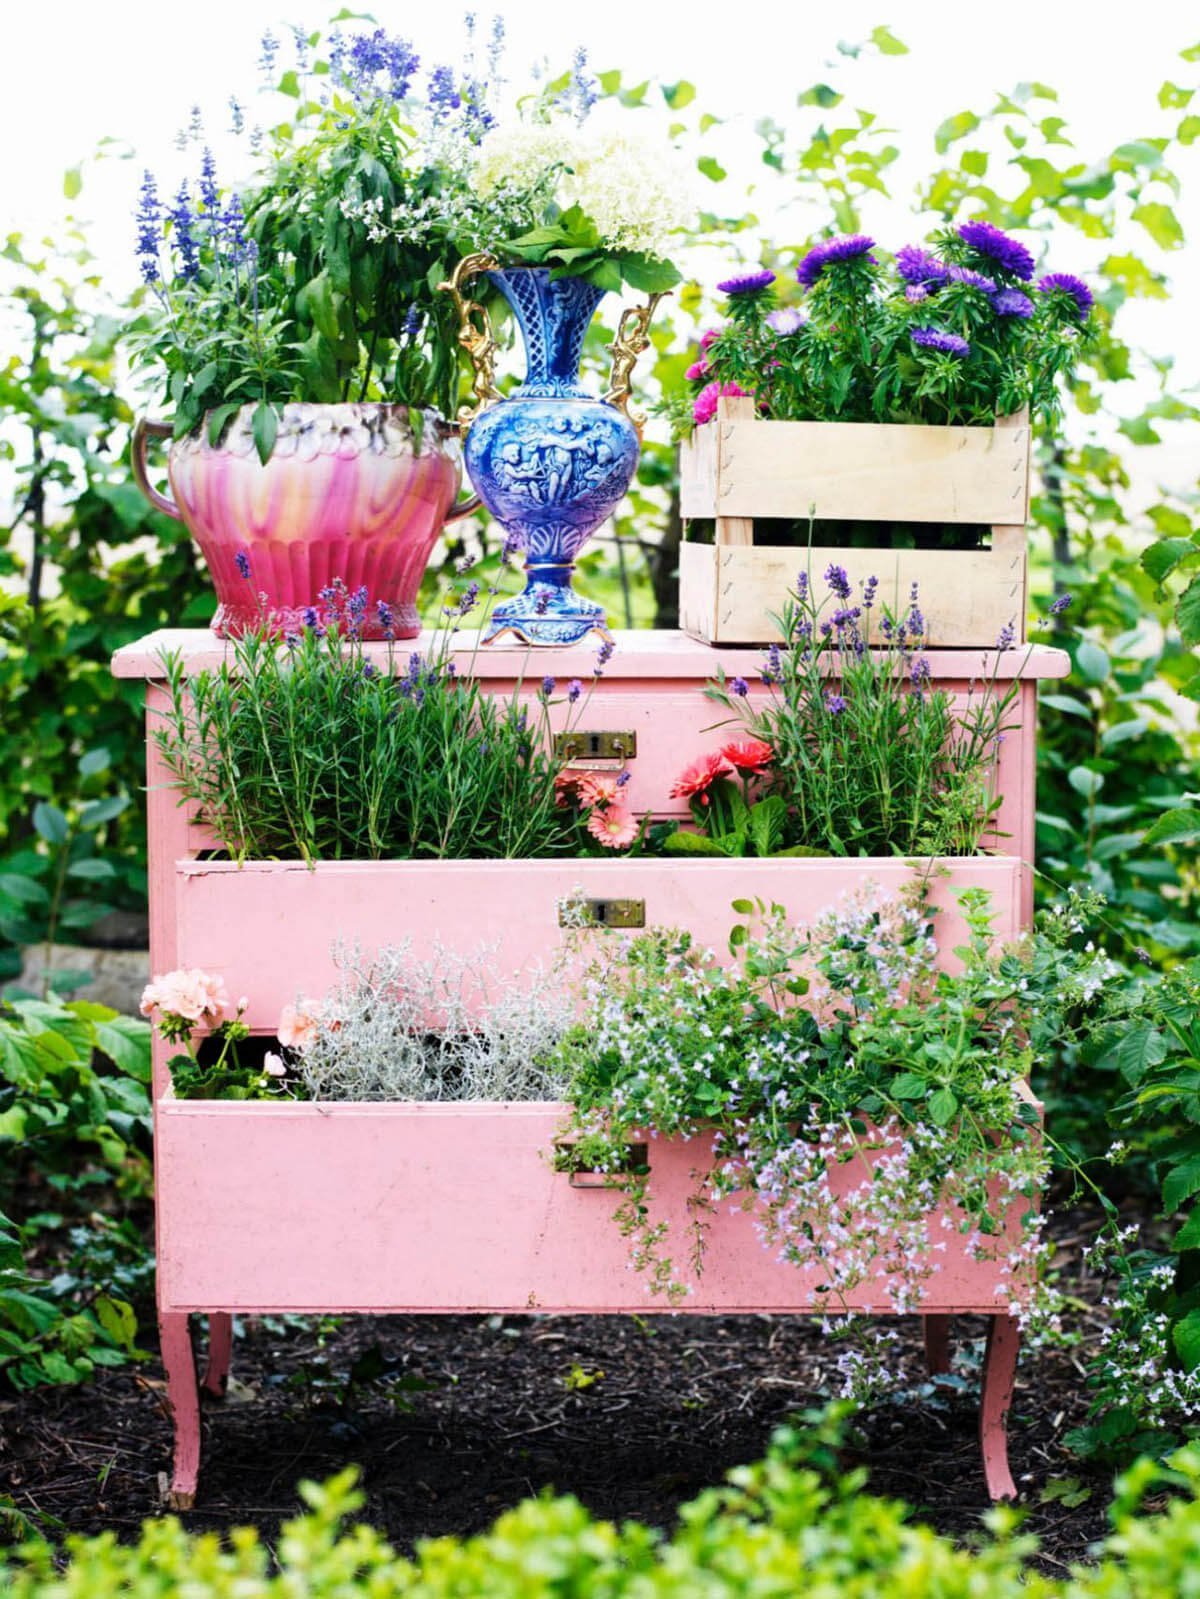 39 Best Creative Garden Container Ideas and Designs for 2017